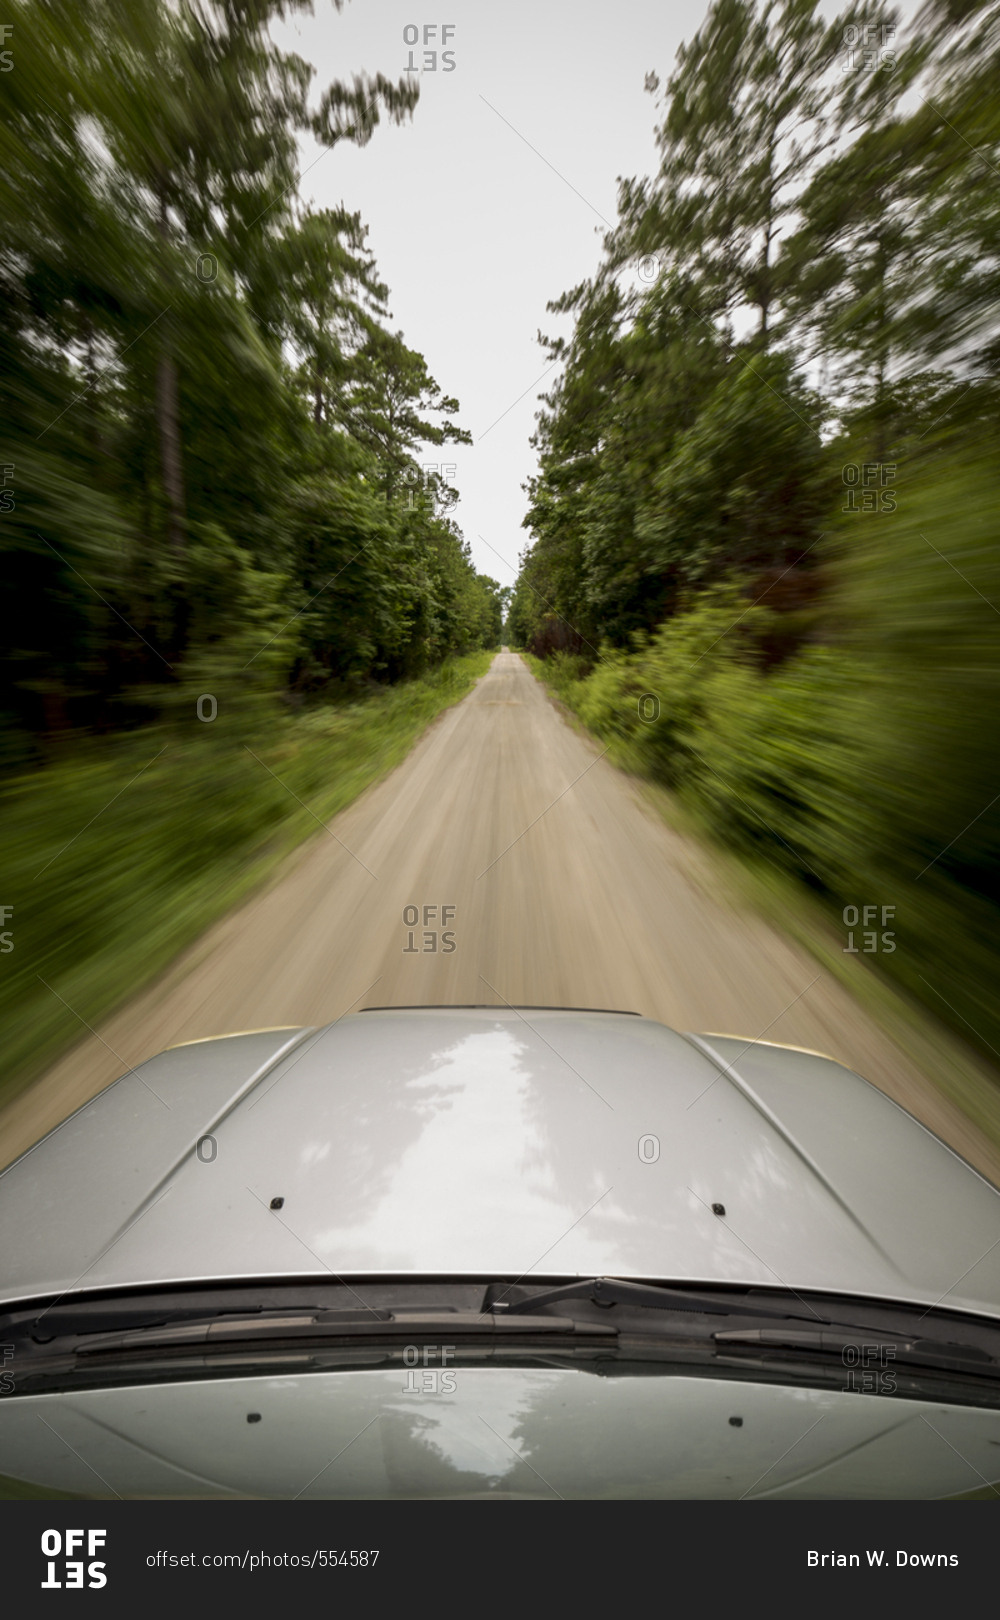 Off-road vehicle exploring road lined with longleaf pines in Croatan National Forest